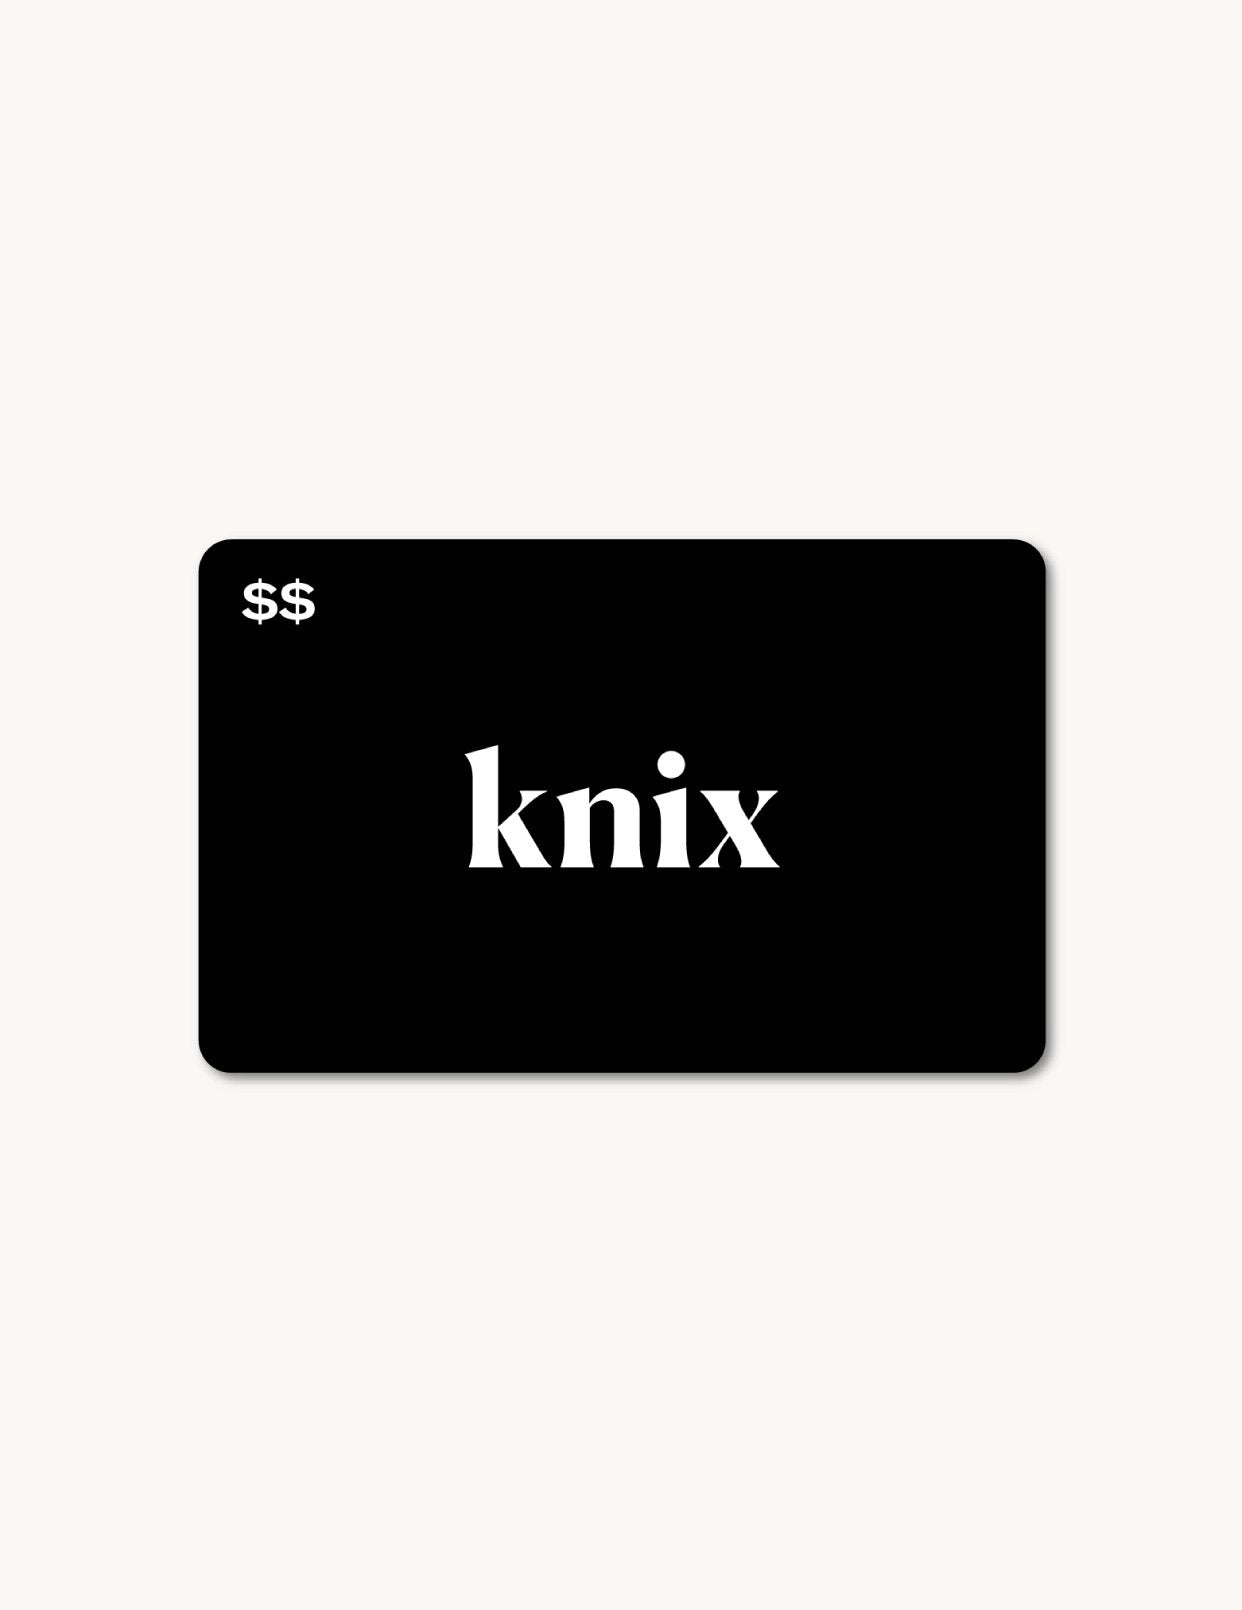 Knix Teen Emails, Sales & Deals - Page 1